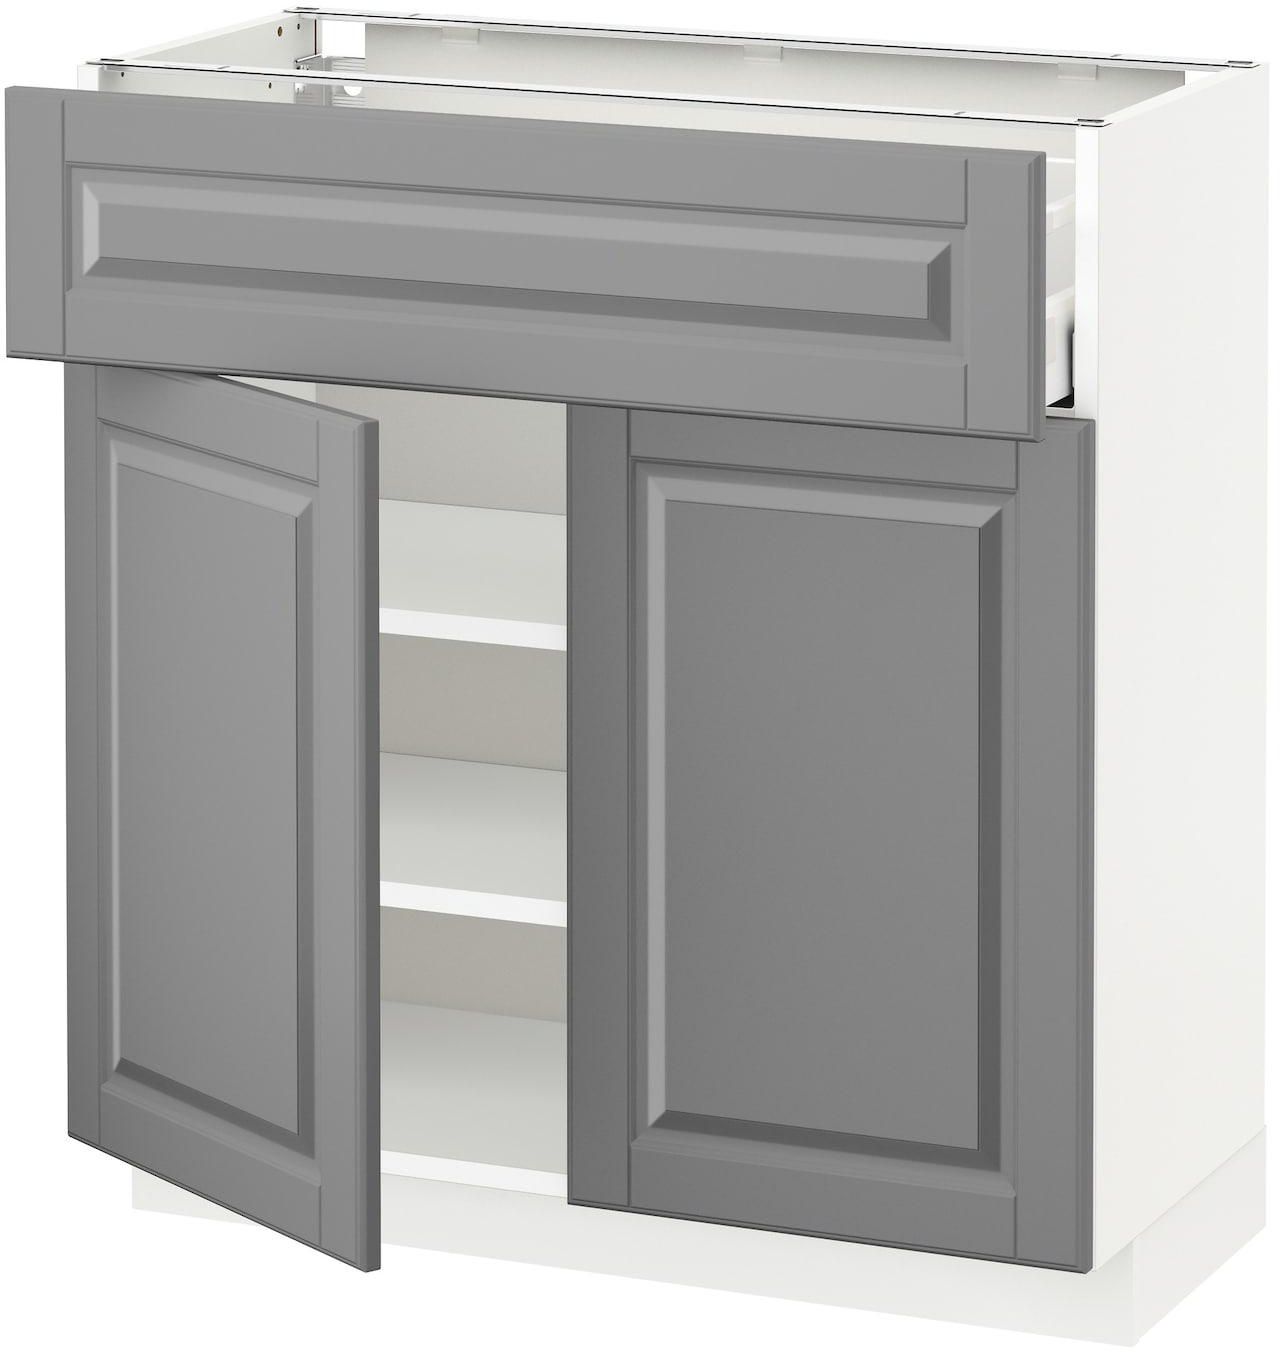 METOD / MAXIMERA Base cabinet with drawer/2 doors - white/Bodbyn grey 80x37 cm